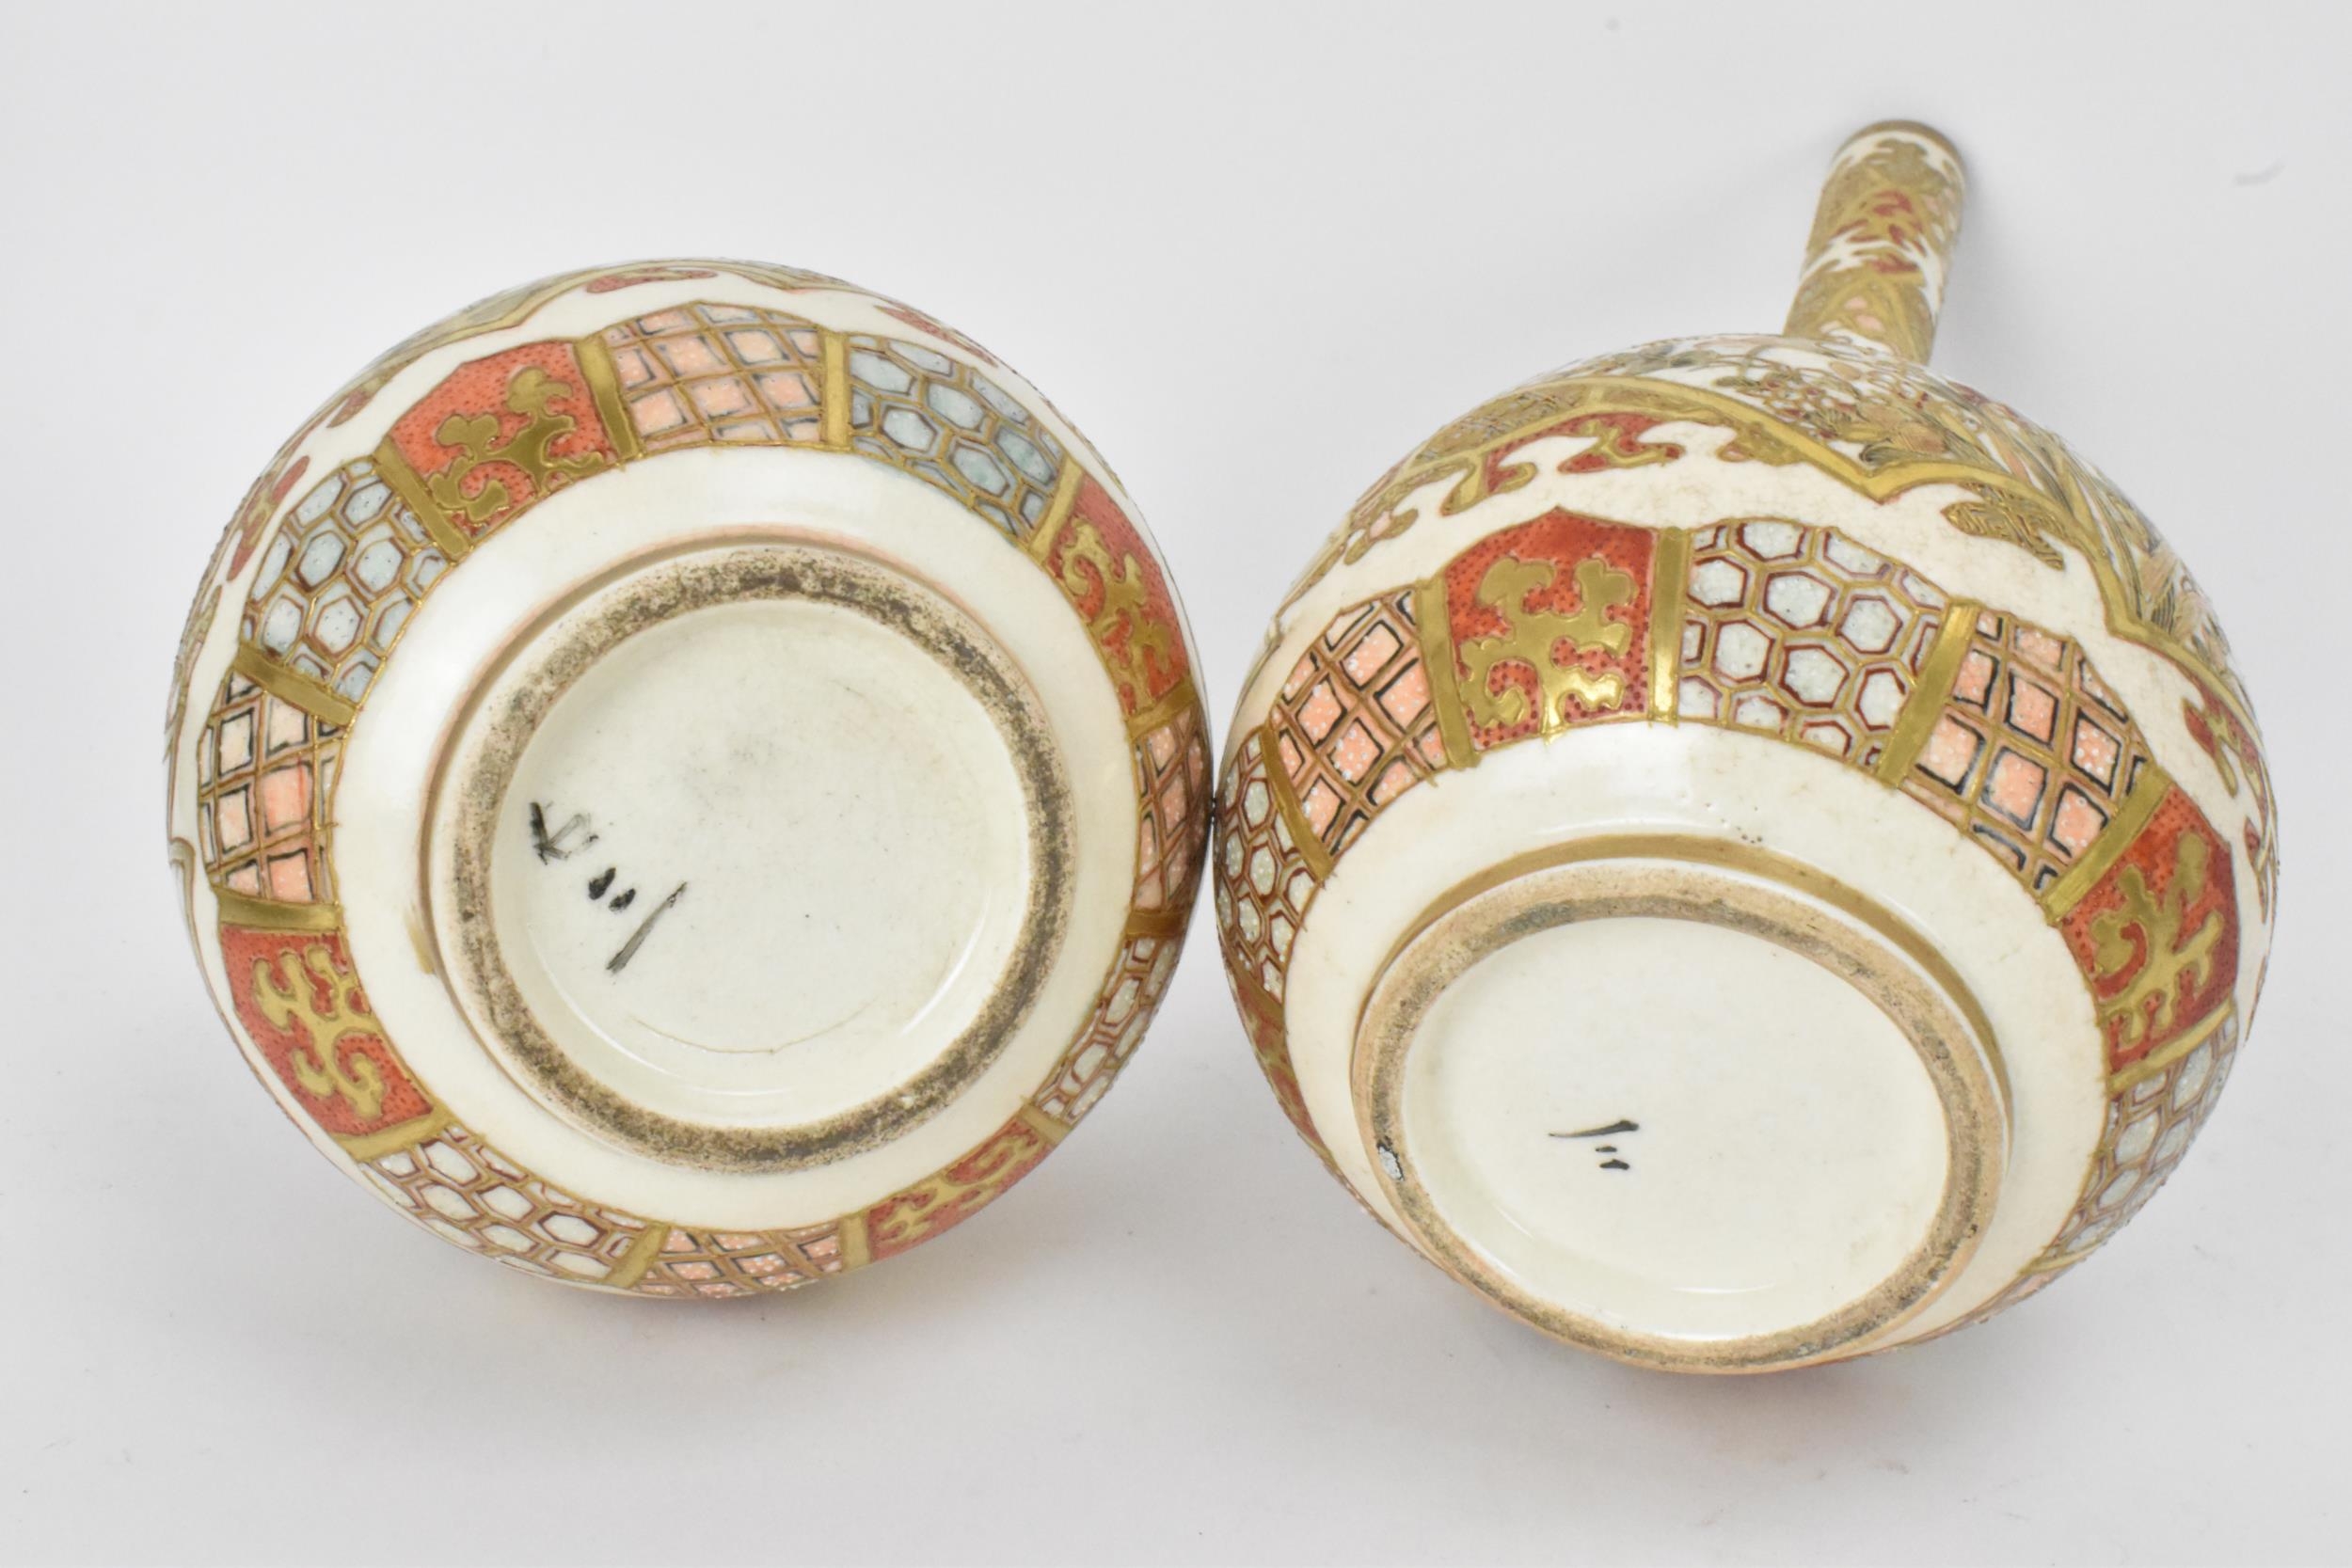 A pair of Japanese Meiji period satsuma bottle neck vases, of onion shape with shaped cartouches - Image 6 of 6